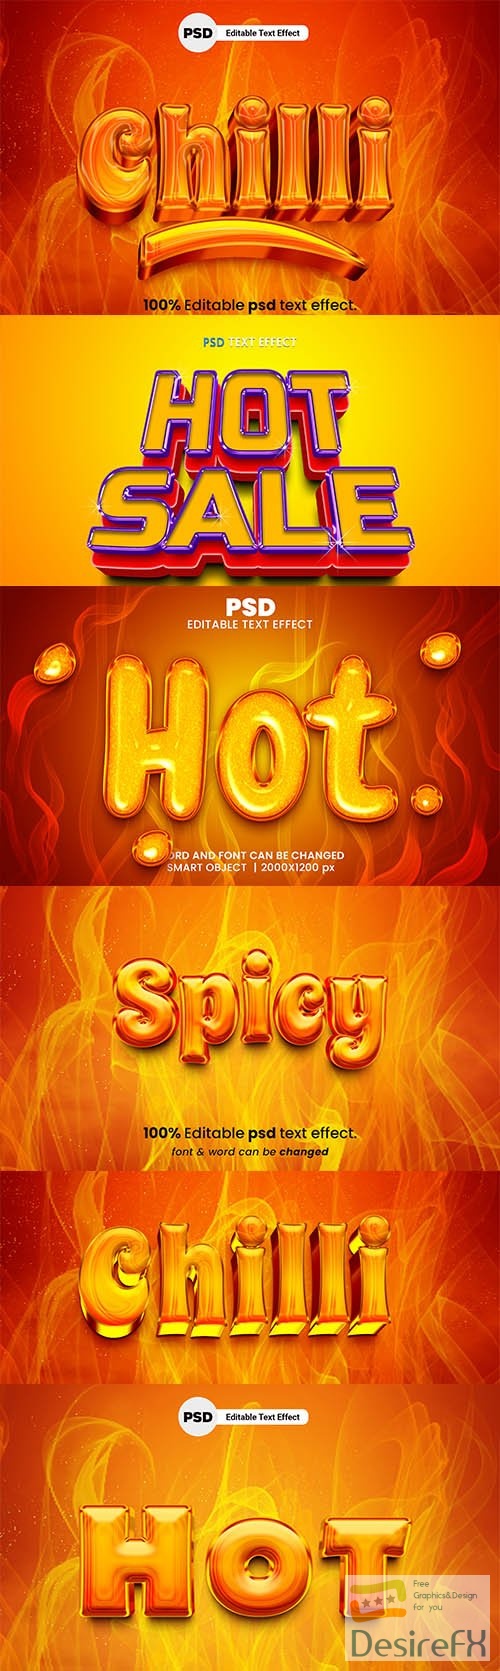 Hot spicy 3d editable psd text effect